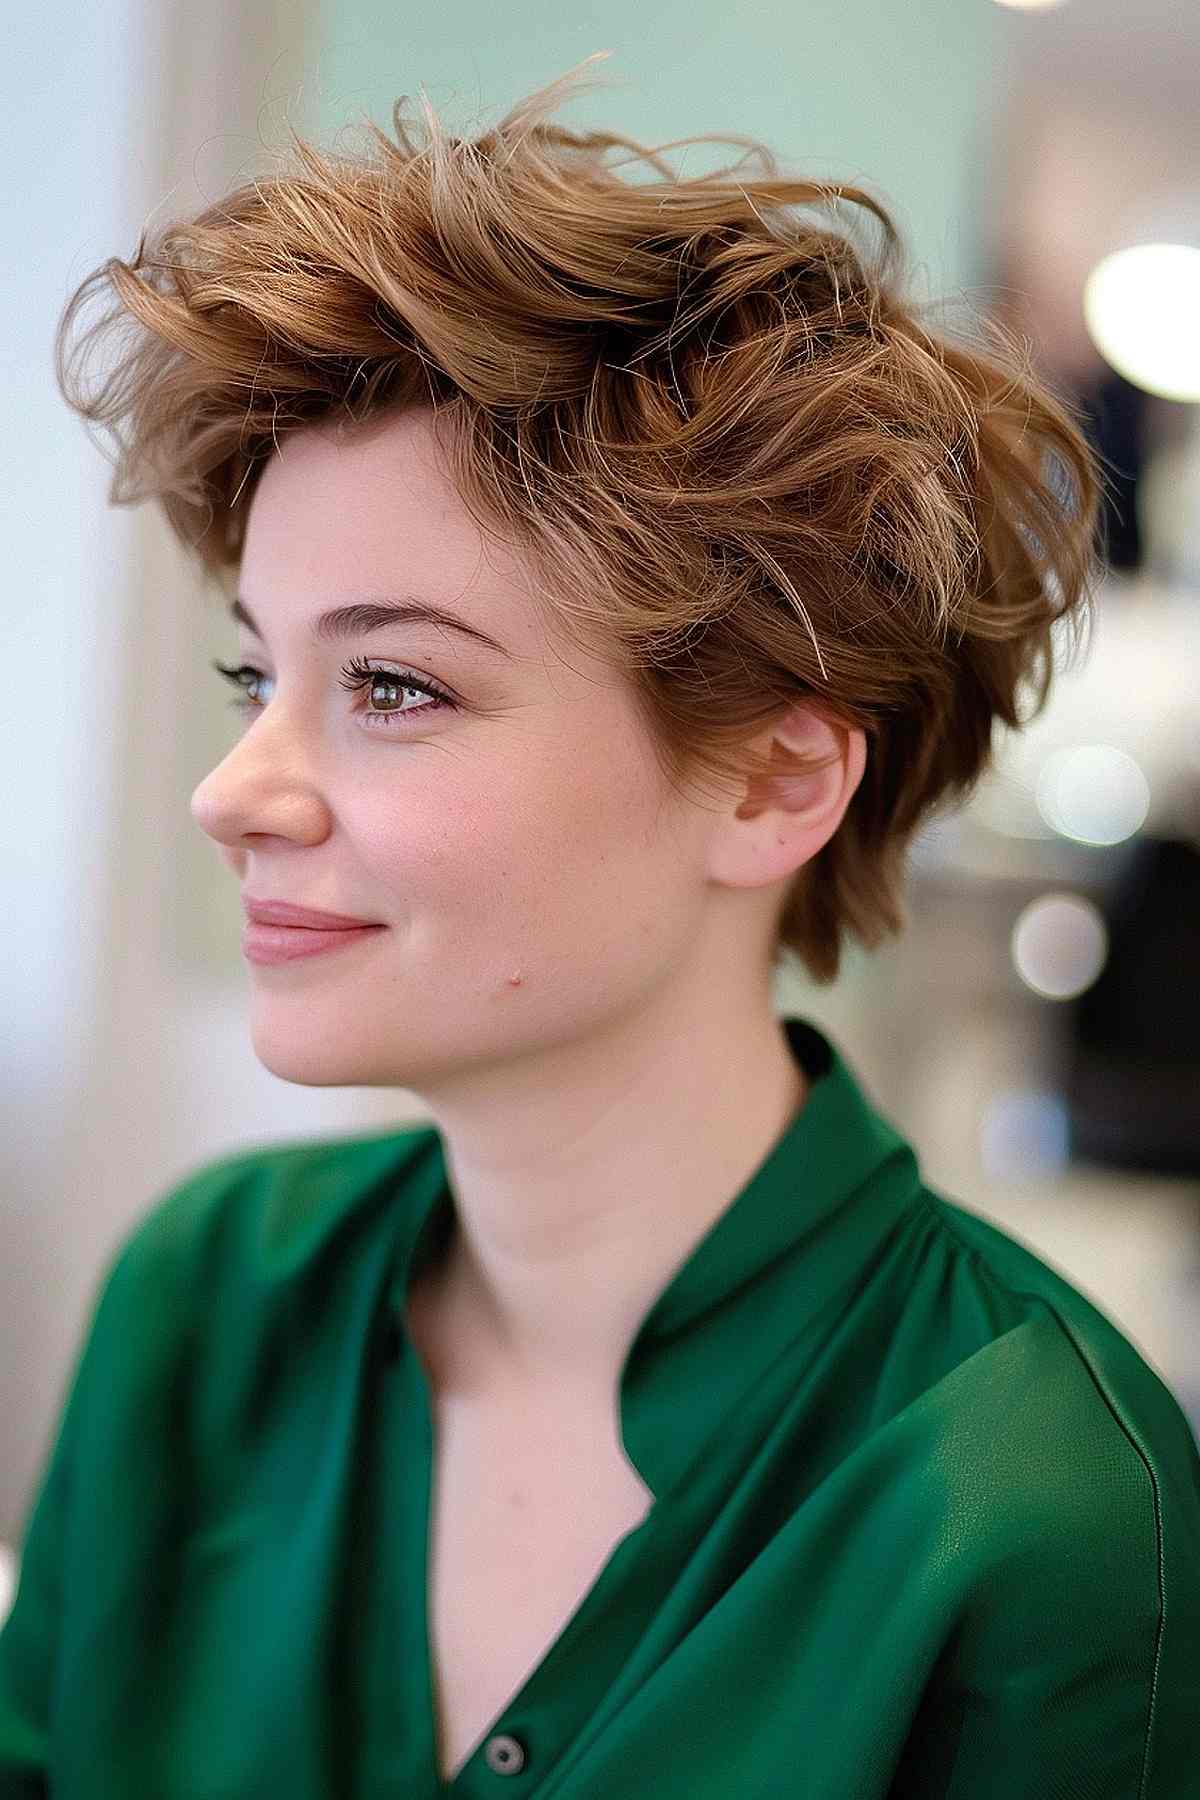 Young woman with a voluminous feathered pixie cut in caramel highlights, styled in a tousled manner to enhance the natural fullness of her thick hair.